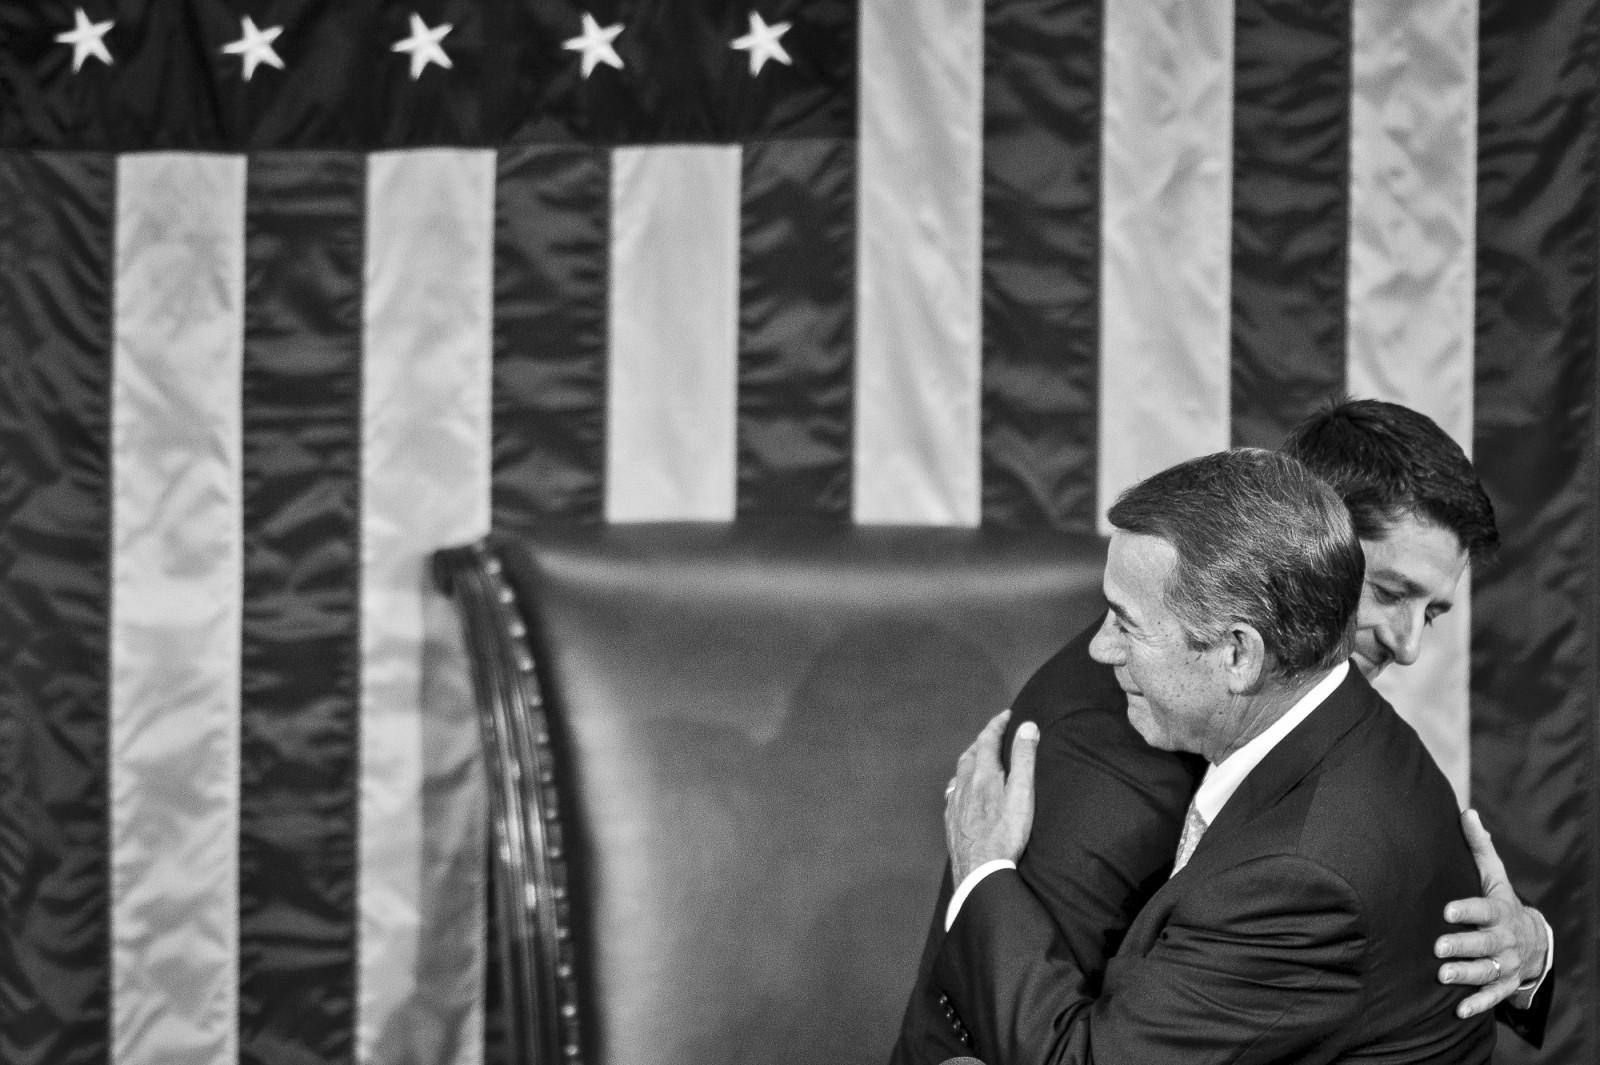 Rep. Paul Ryan (R-WI) is welcomed by Speaker of the House John Boehner (R-OH) after being elected Speaker of the House of Representatives on October 29, 2015 in Washington, D.C. Earlier the outgoing Speaker, Rep. John Boehner (R-OH), gave his farewell address to Congress. He is retiring on October 30, 2015. Photo by Pete Marovich/UPI